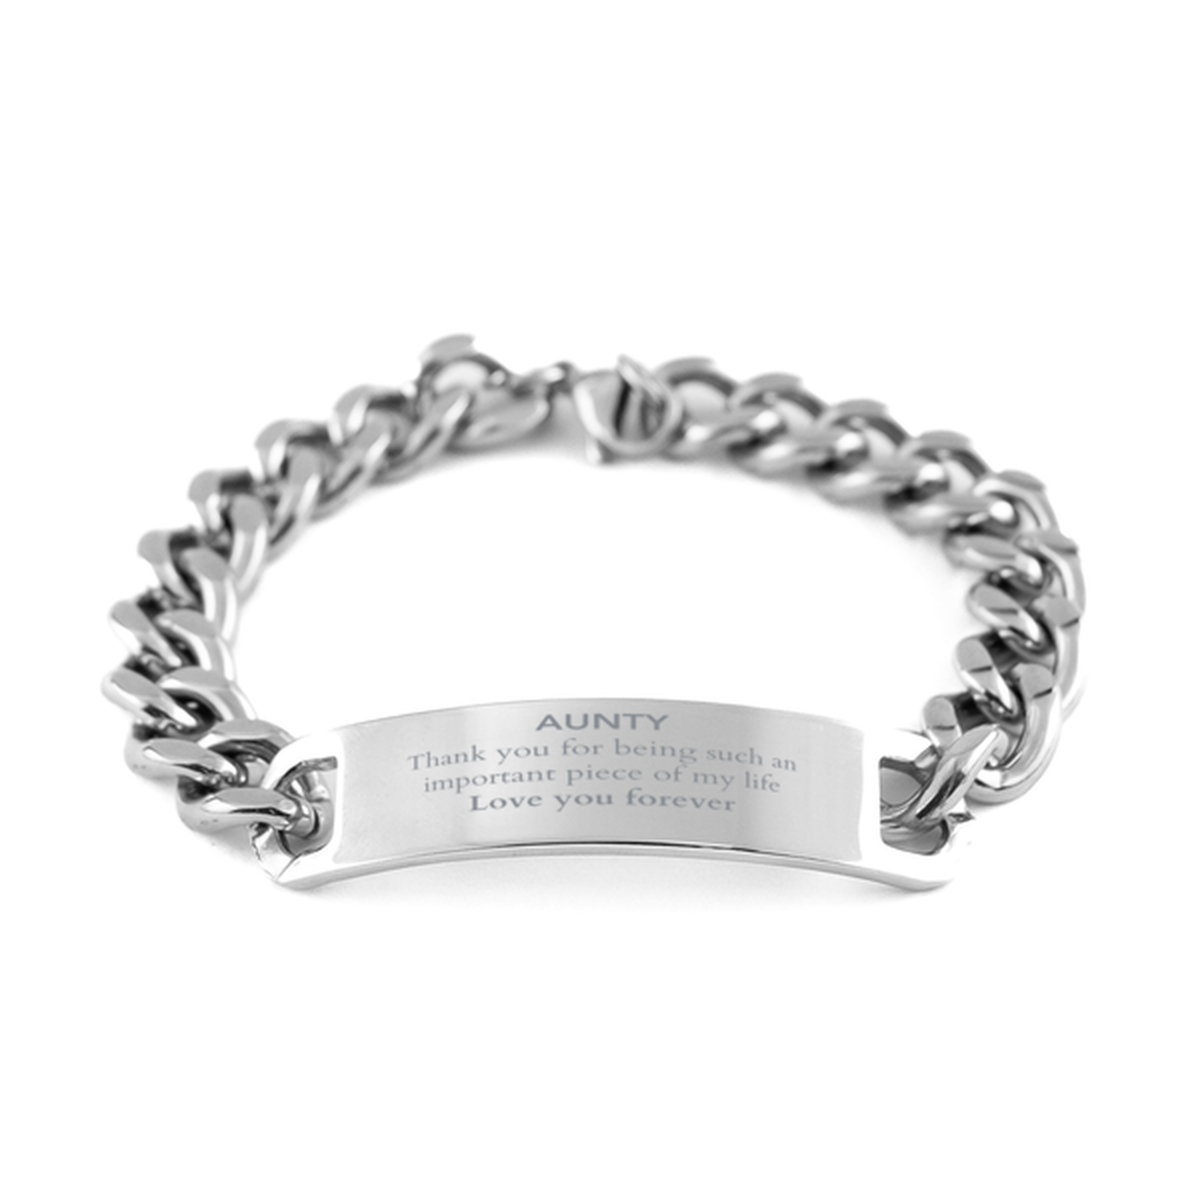 Appropriate Aunty Cuban Chain Stainless Steel Bracelet Epic Birthday Gifts for Aunty Thank you for being such an important piece of my life Aunty Christmas Mothers Fathers Day